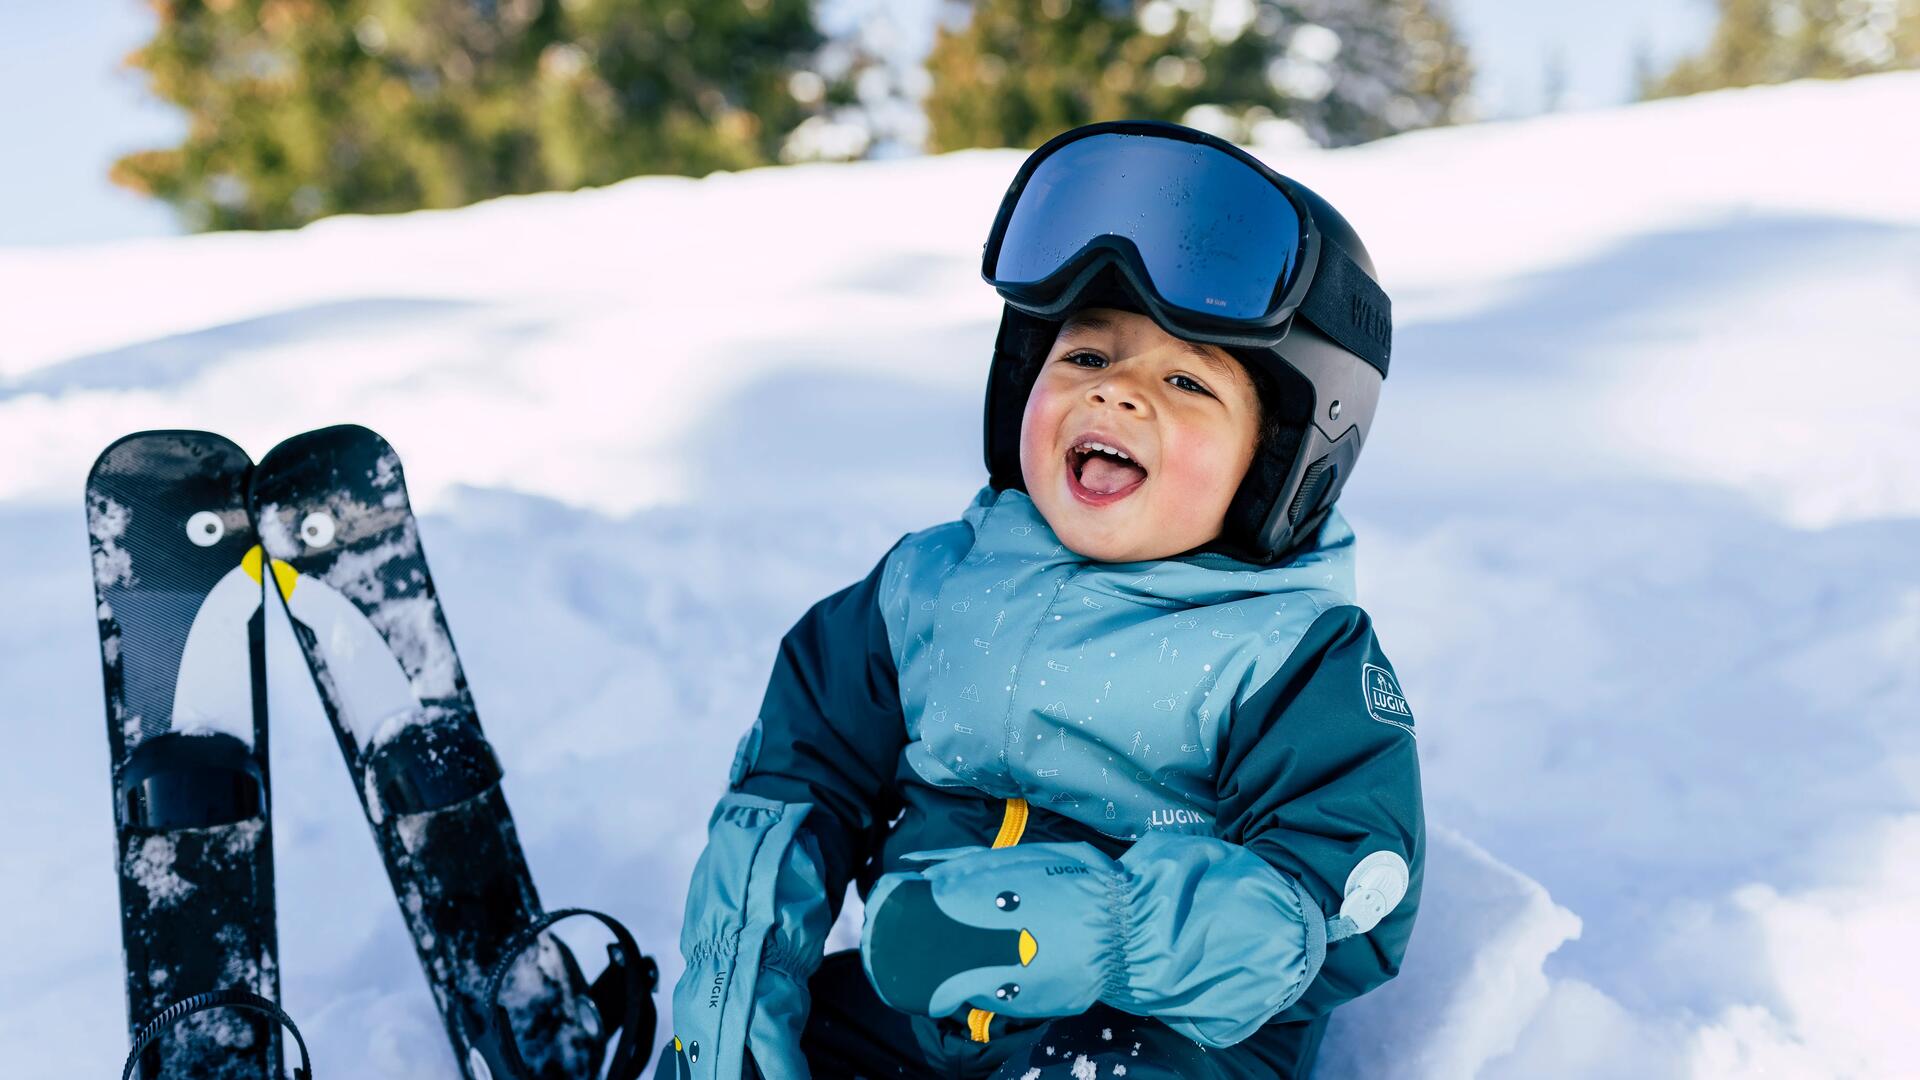 HOW TO DRESS YOUR KIDS PROPERLY FOR SKIING